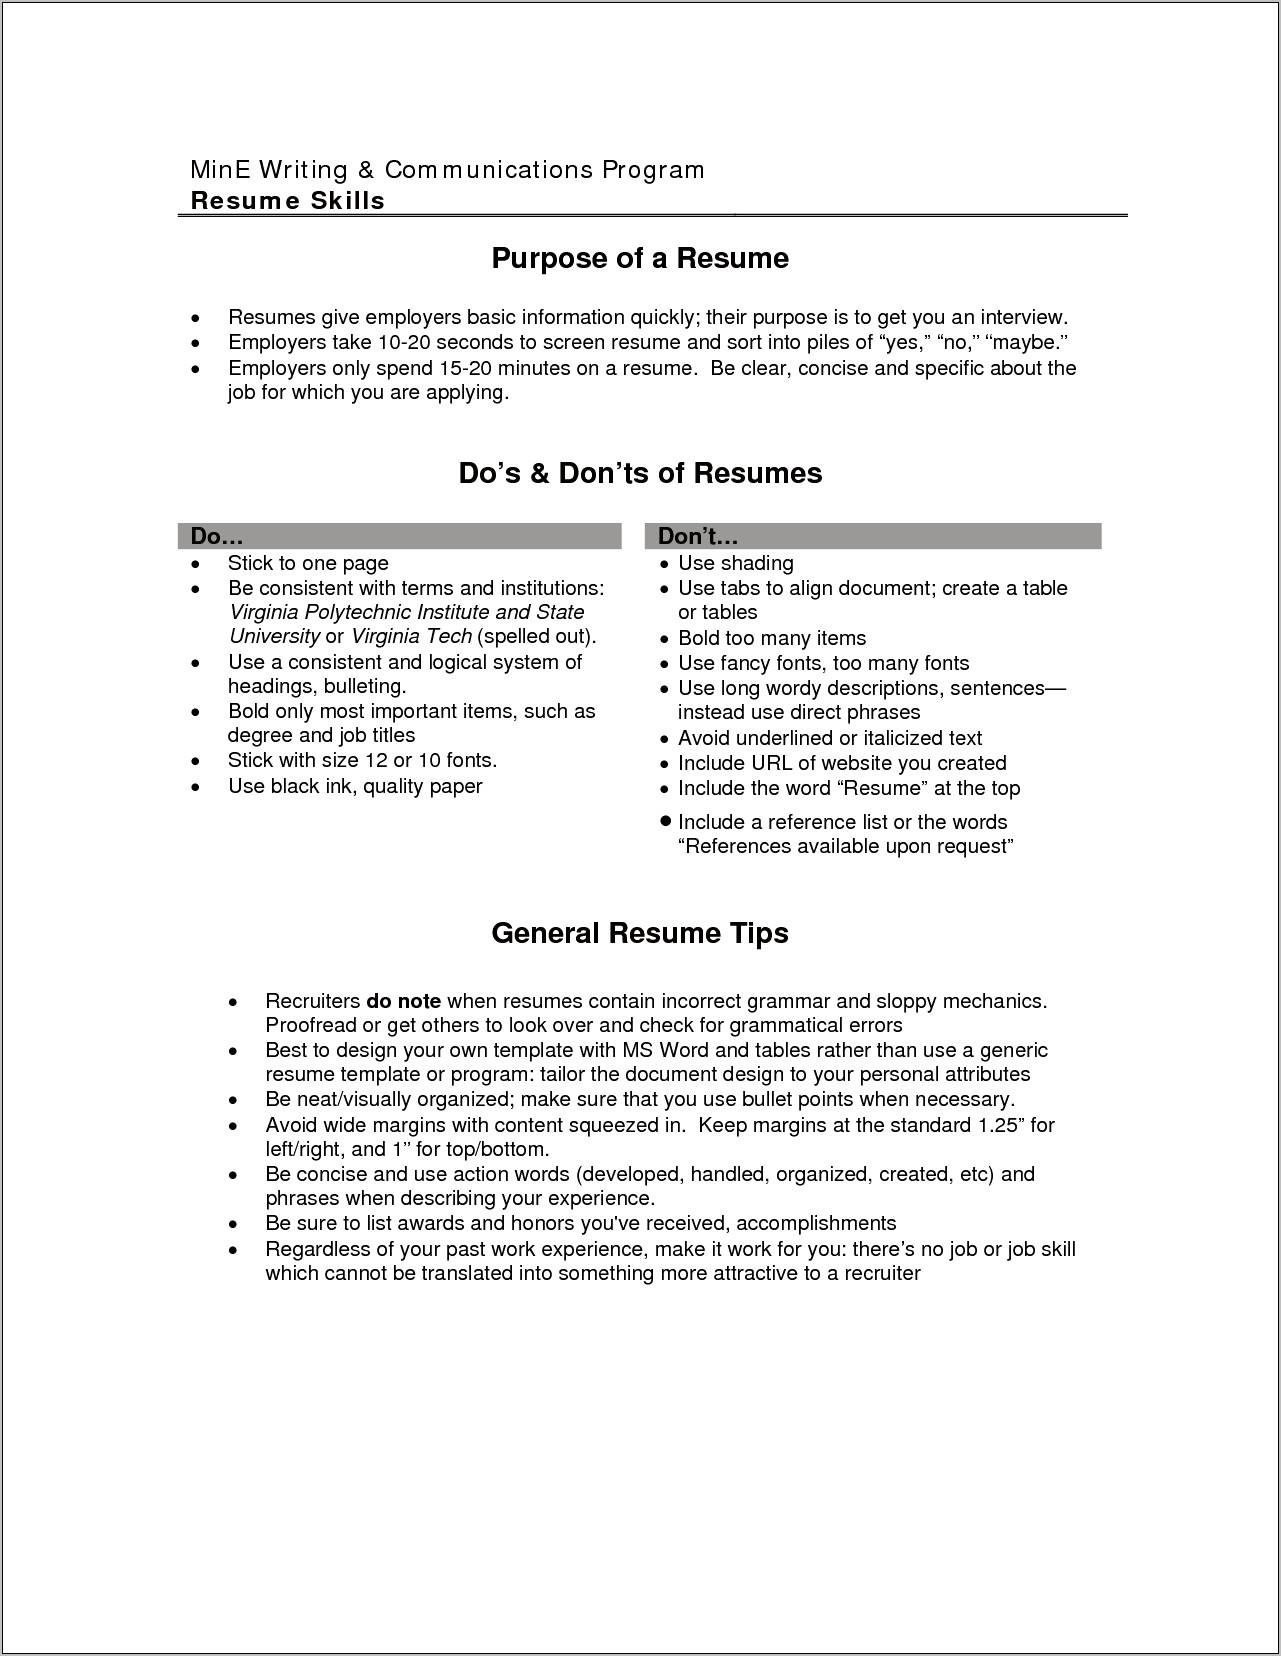 Resume Objective For Any Jobs